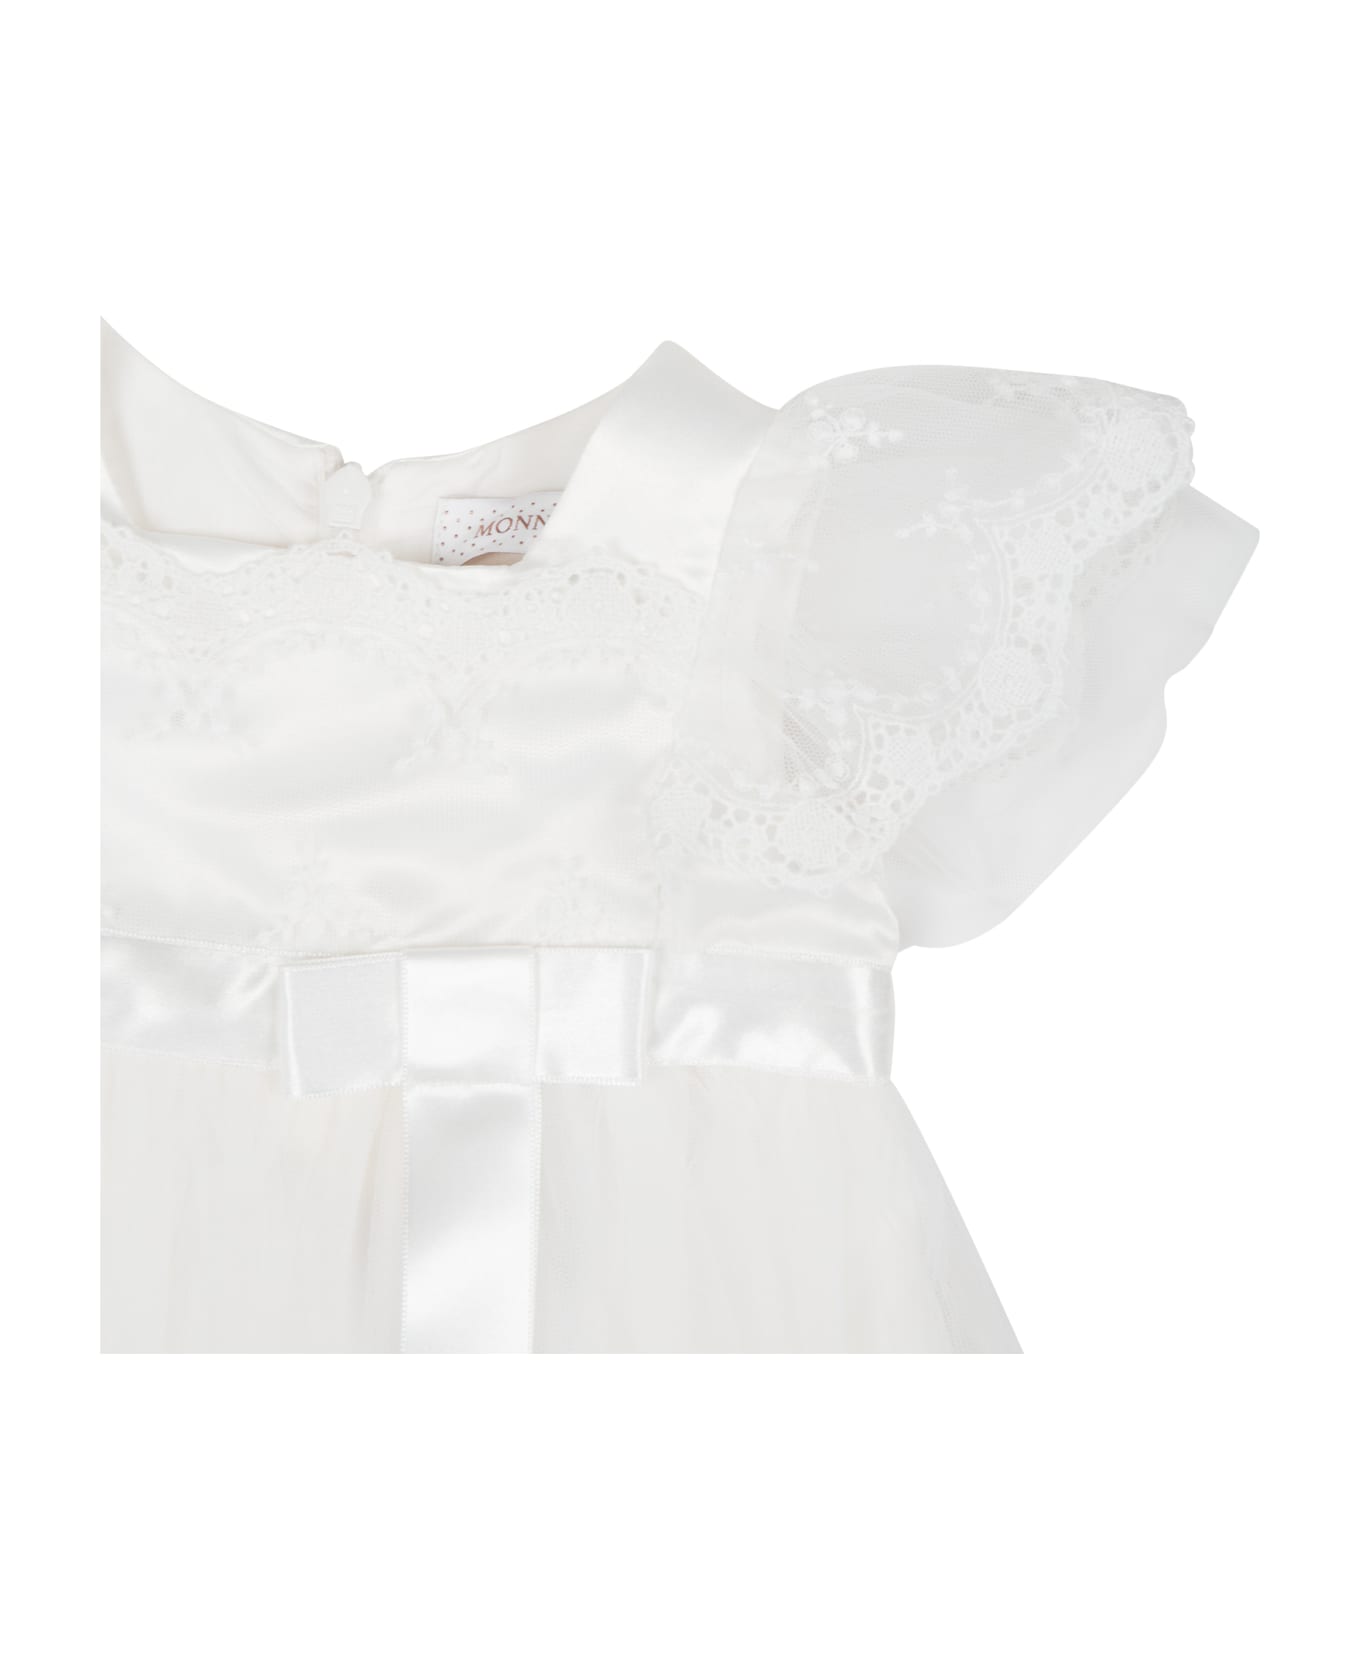 Monnalisa White Dress For Baby Girl With Embroidery And Bow - White